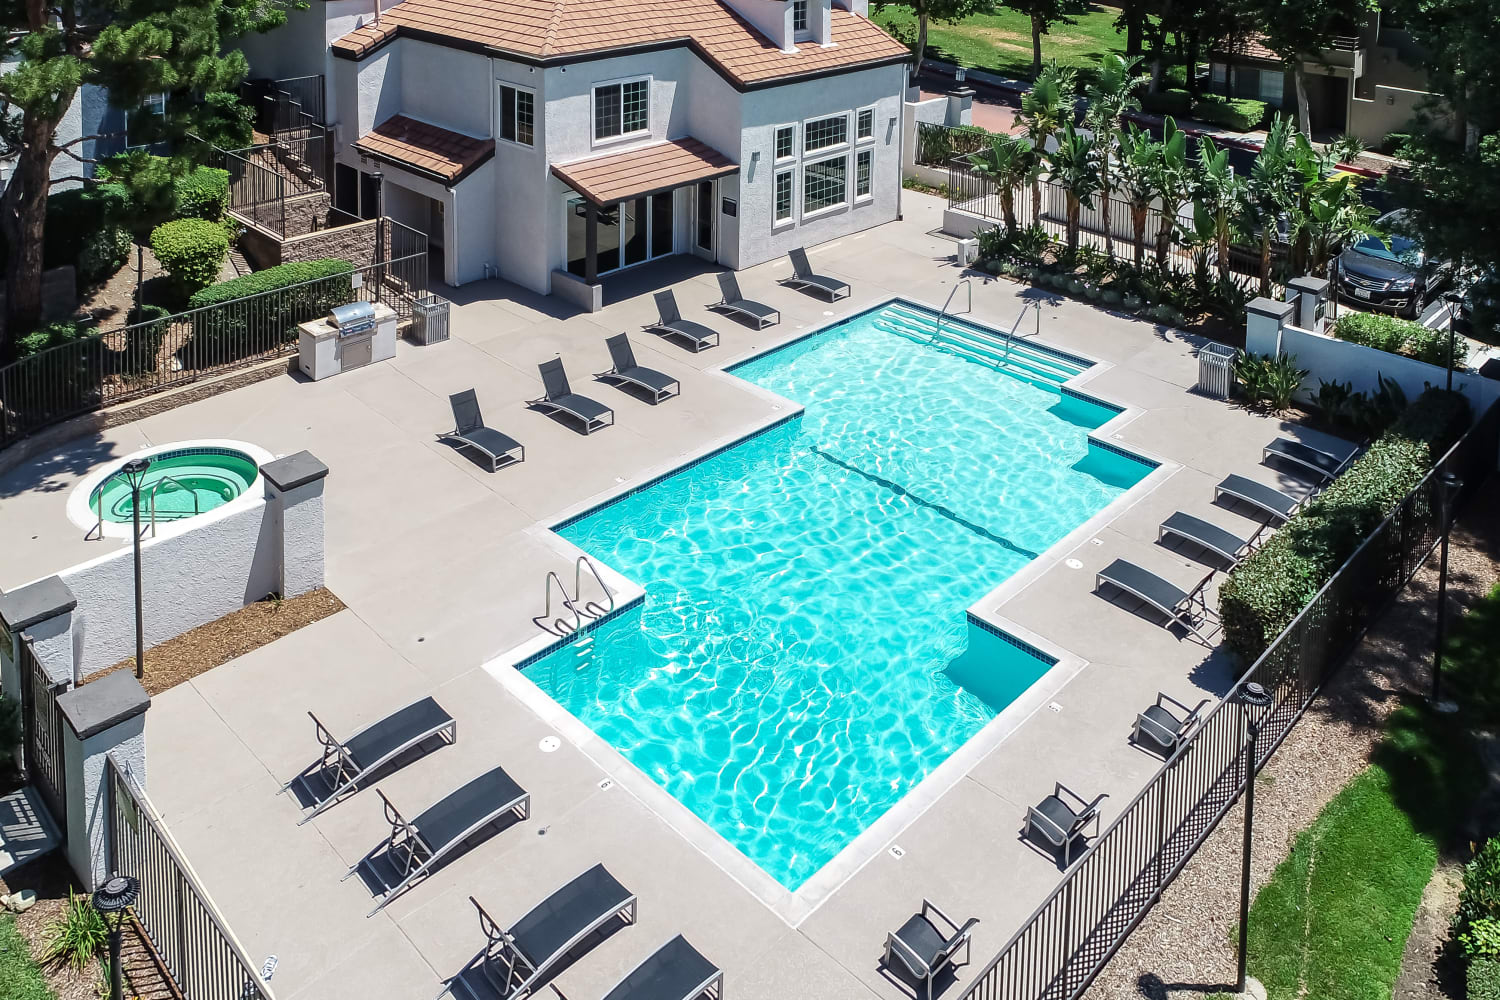 Pool view and beautifully landscaped grounds at The Bluffs in Rancho Cucamonga, California